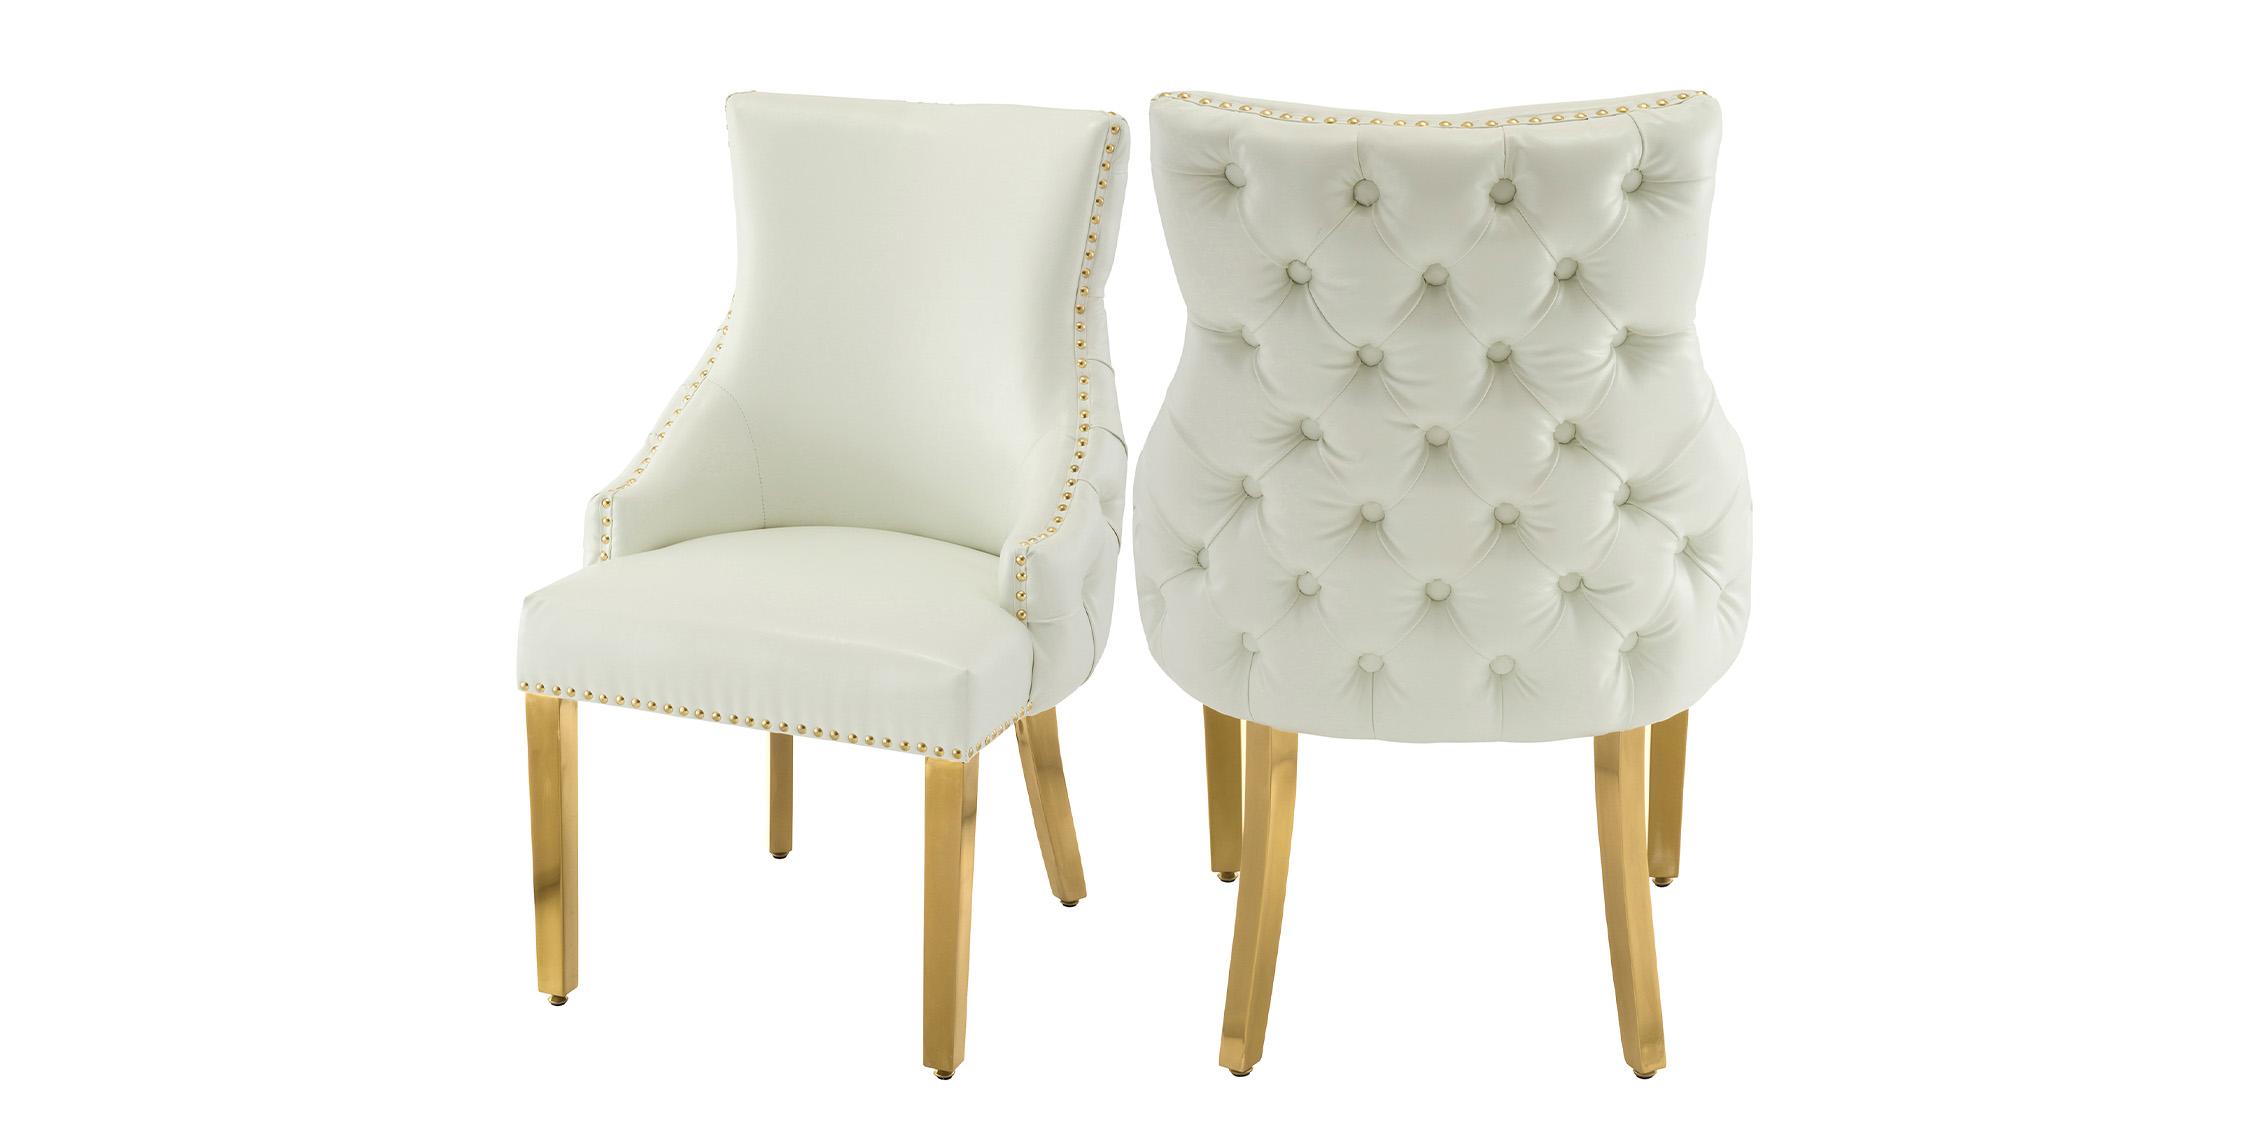 Contemporary, Modern Dining Chair Set TUFT 730White-C 730White-C in White, Gold Faux Leather